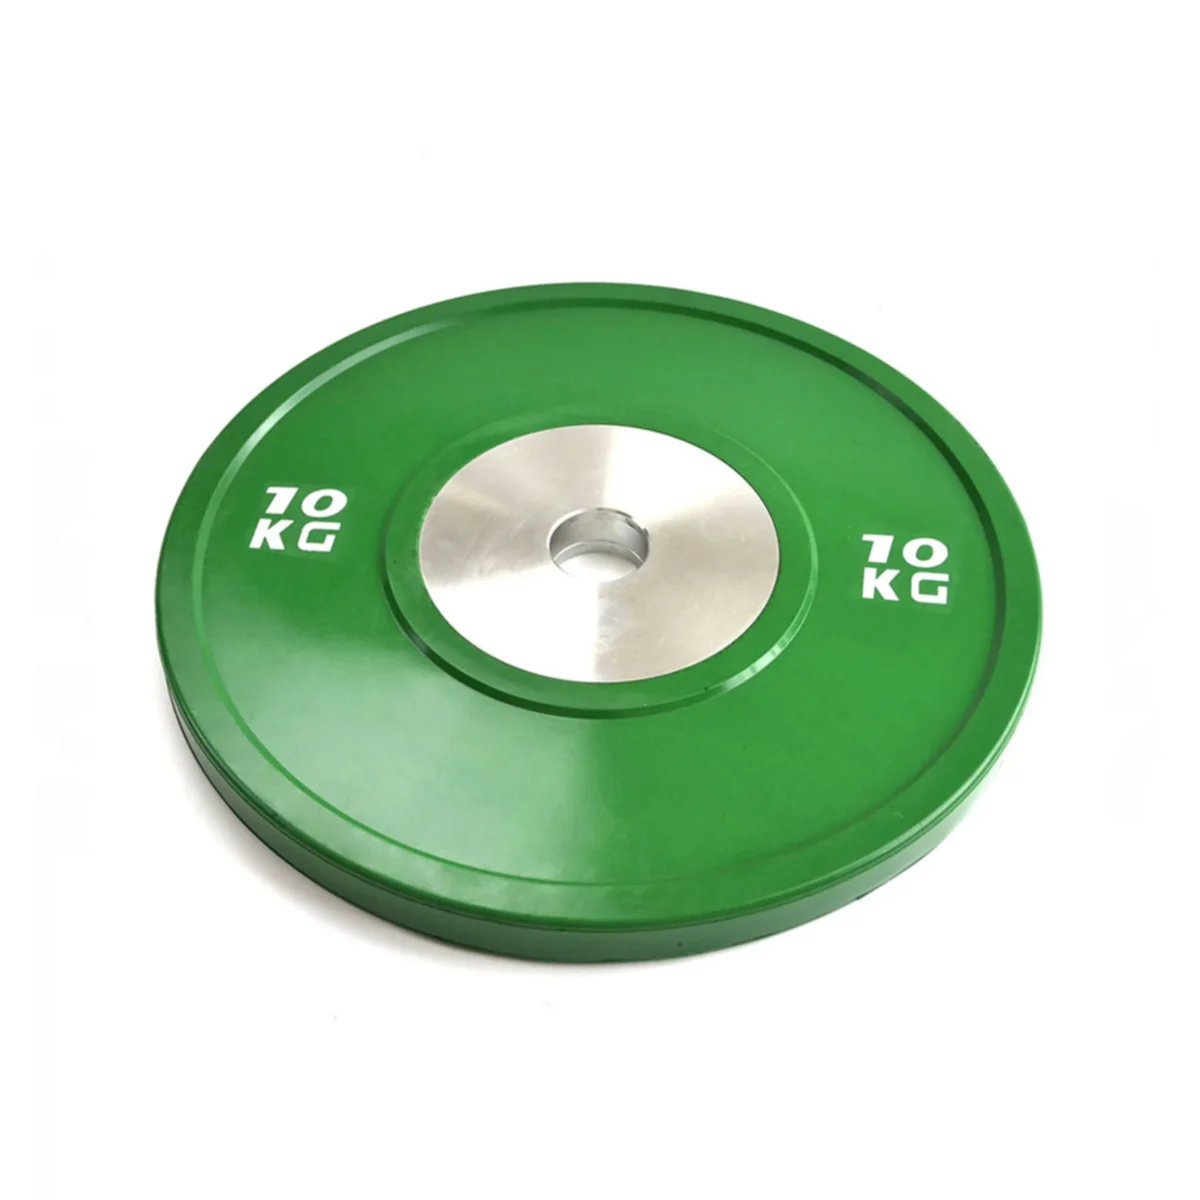 competition bumper plates, competition weight plates, Olympic bumper plates, Olympic weight plate, deadlift plates, weightlifting plates